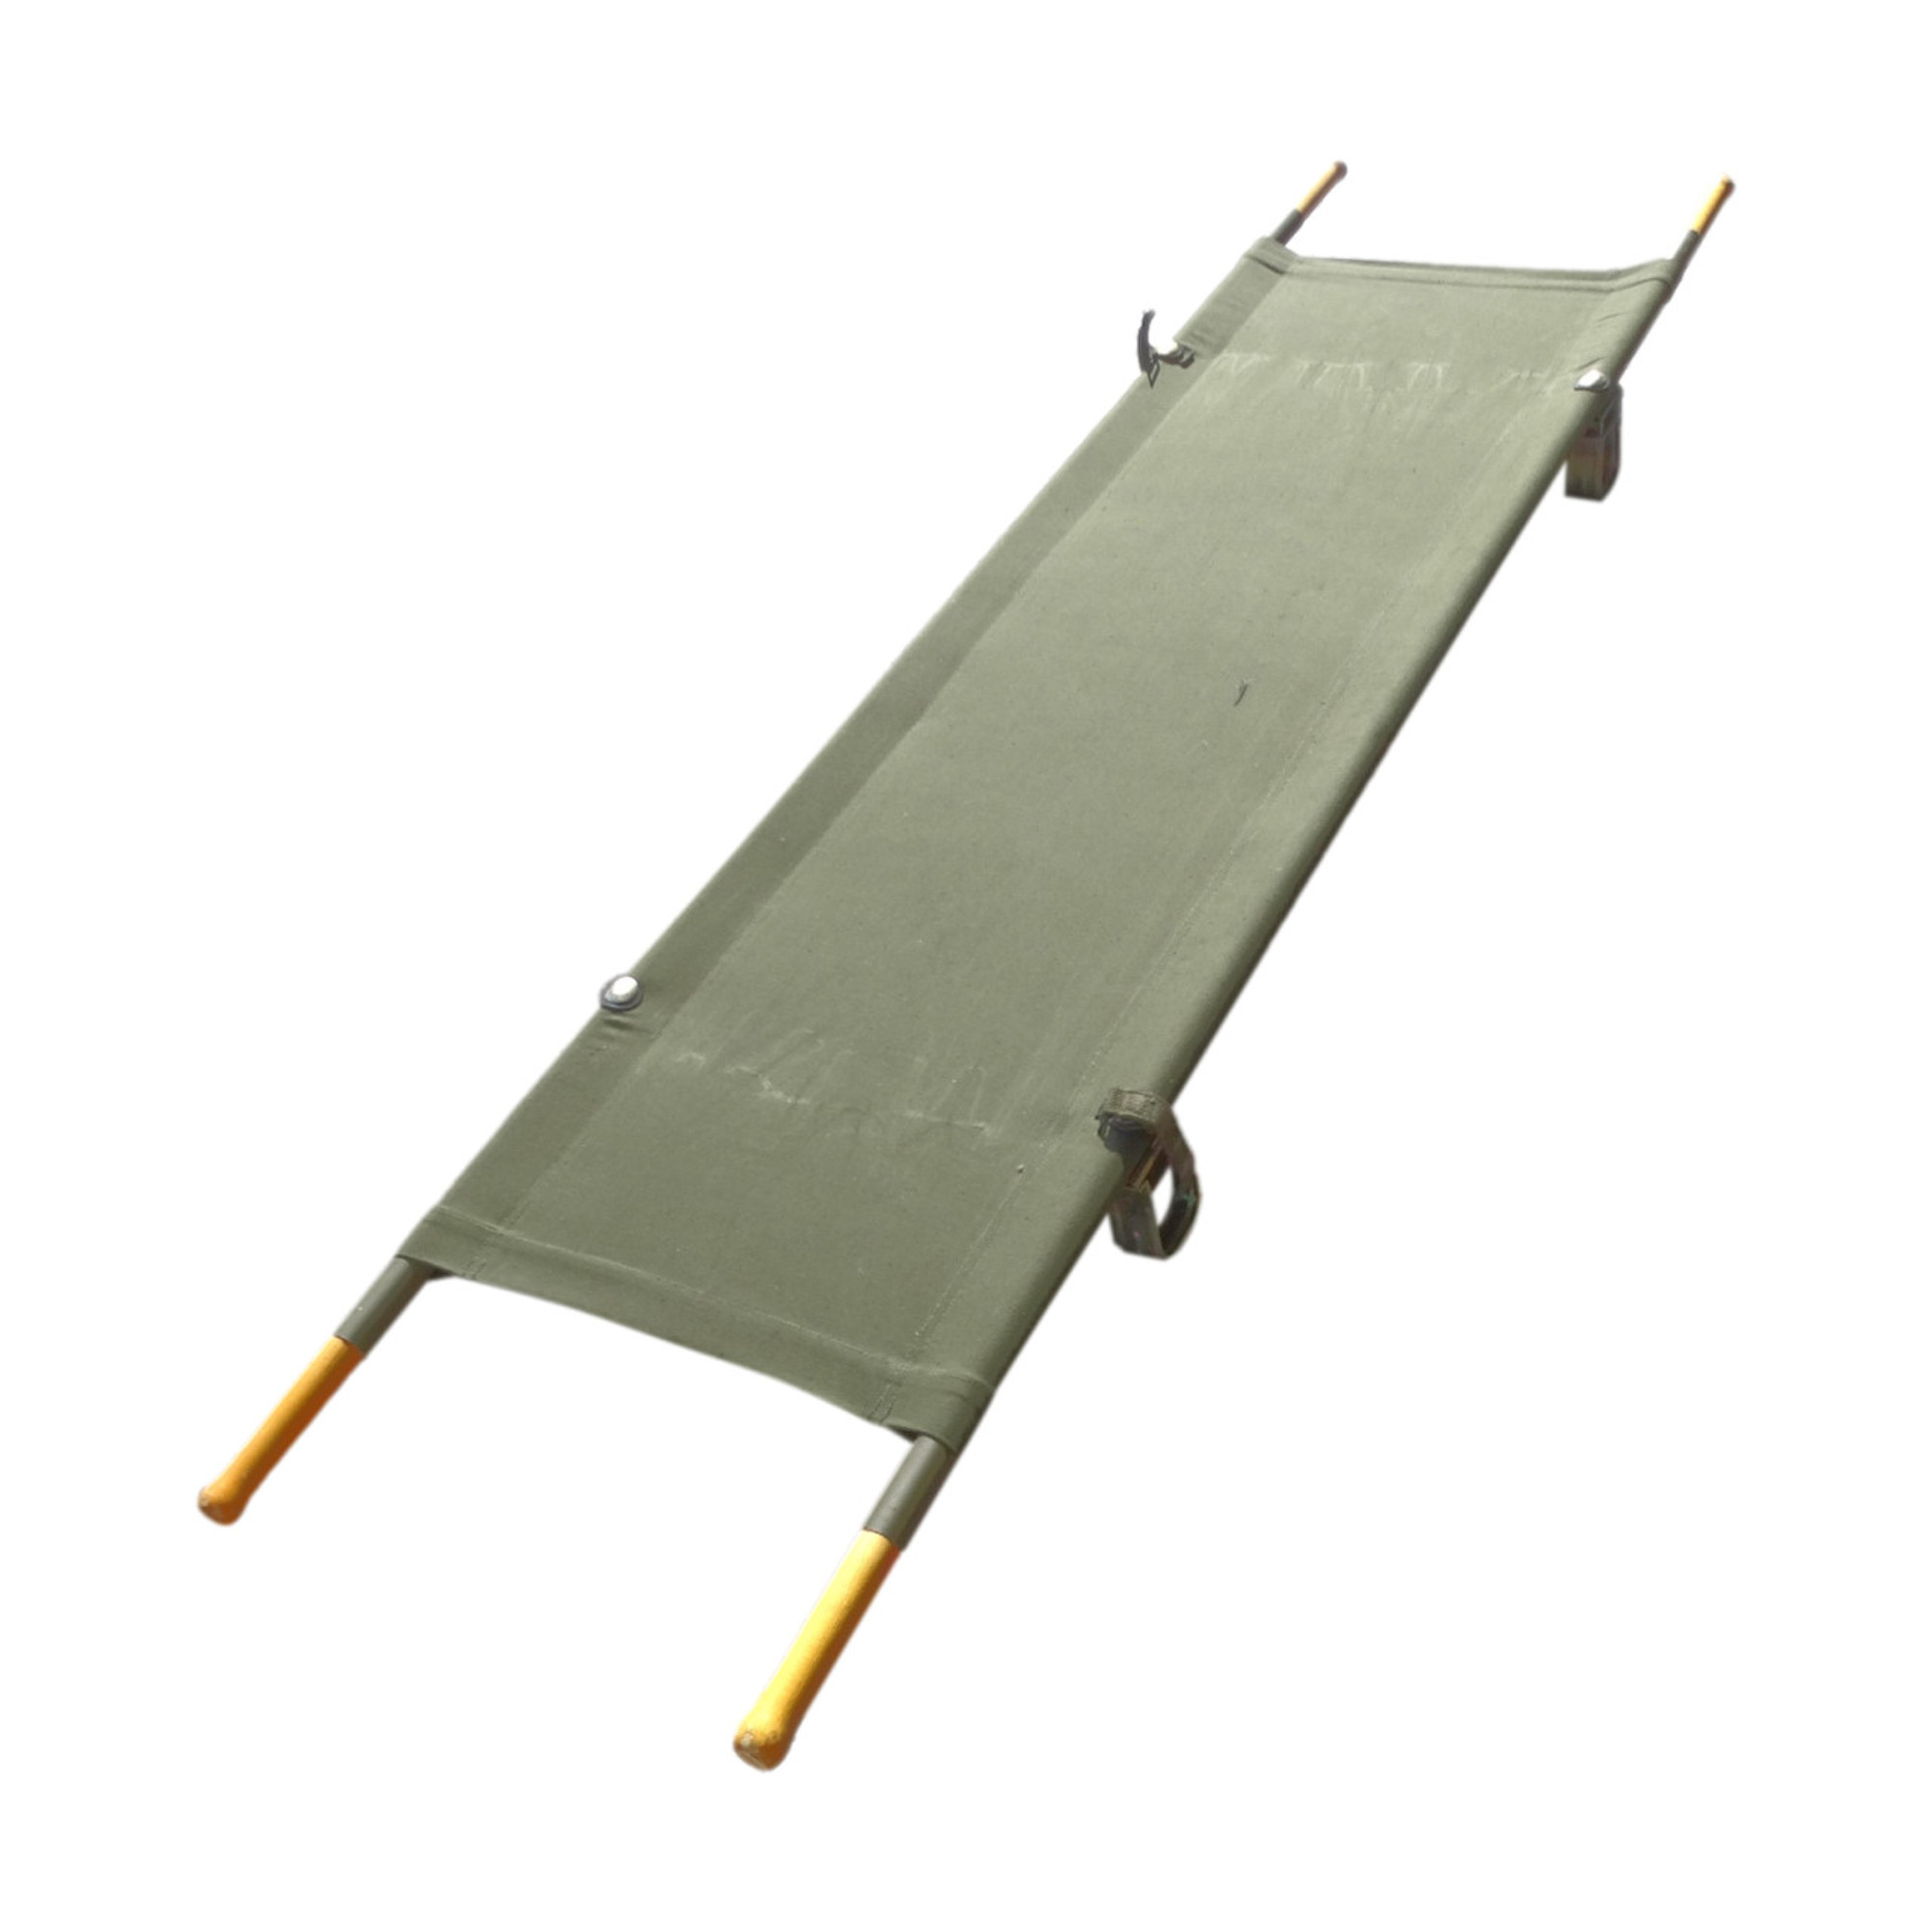 U.S. Armed Forces Folding Military Stretcher